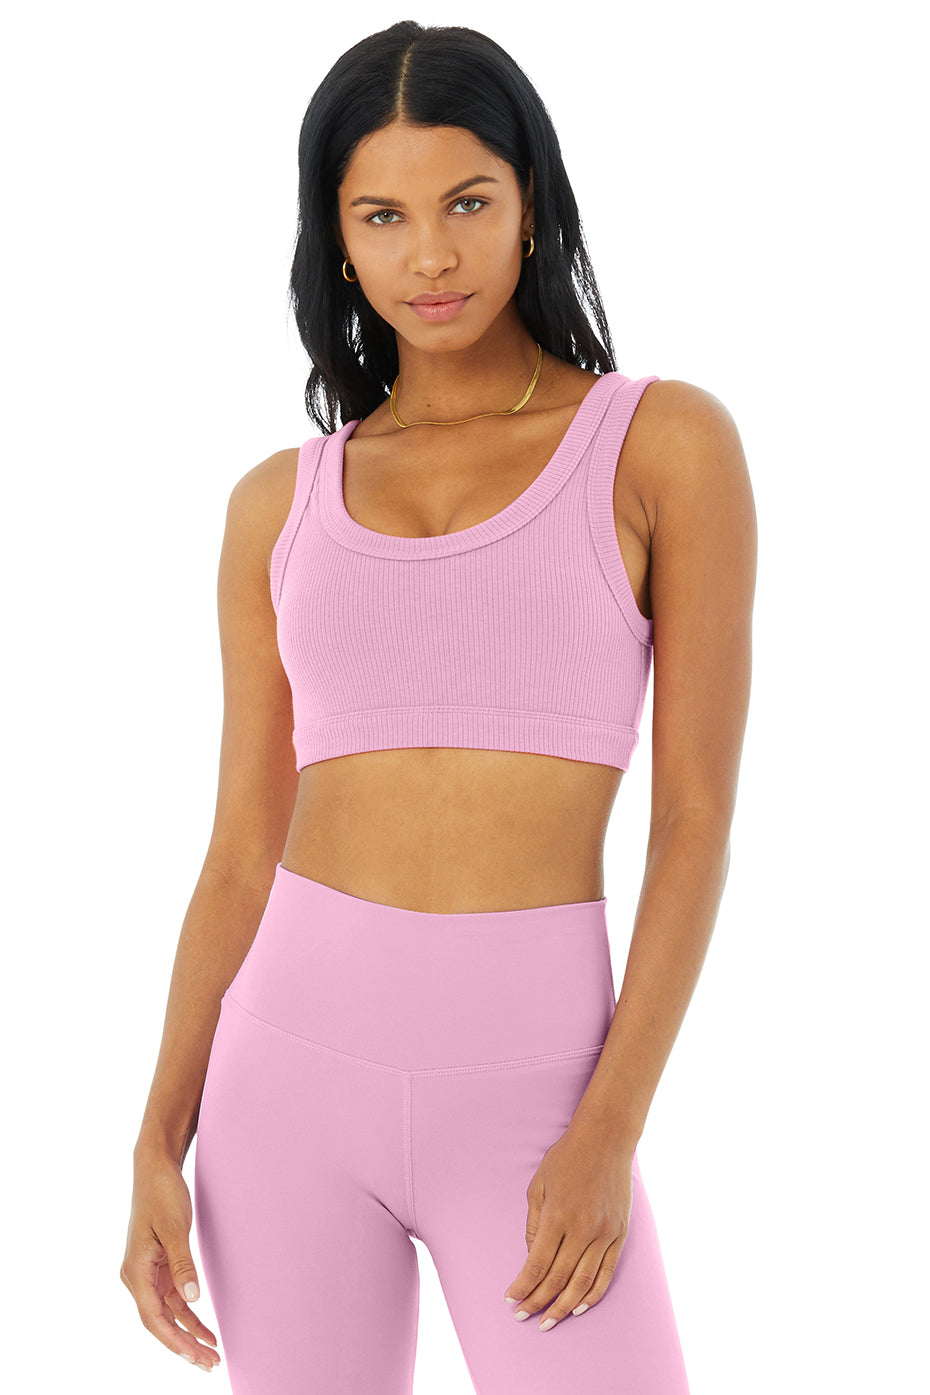 Alo Yoga Interlace Bra in Rosewater size S, Women's Fashion, Activewear on  Carousell